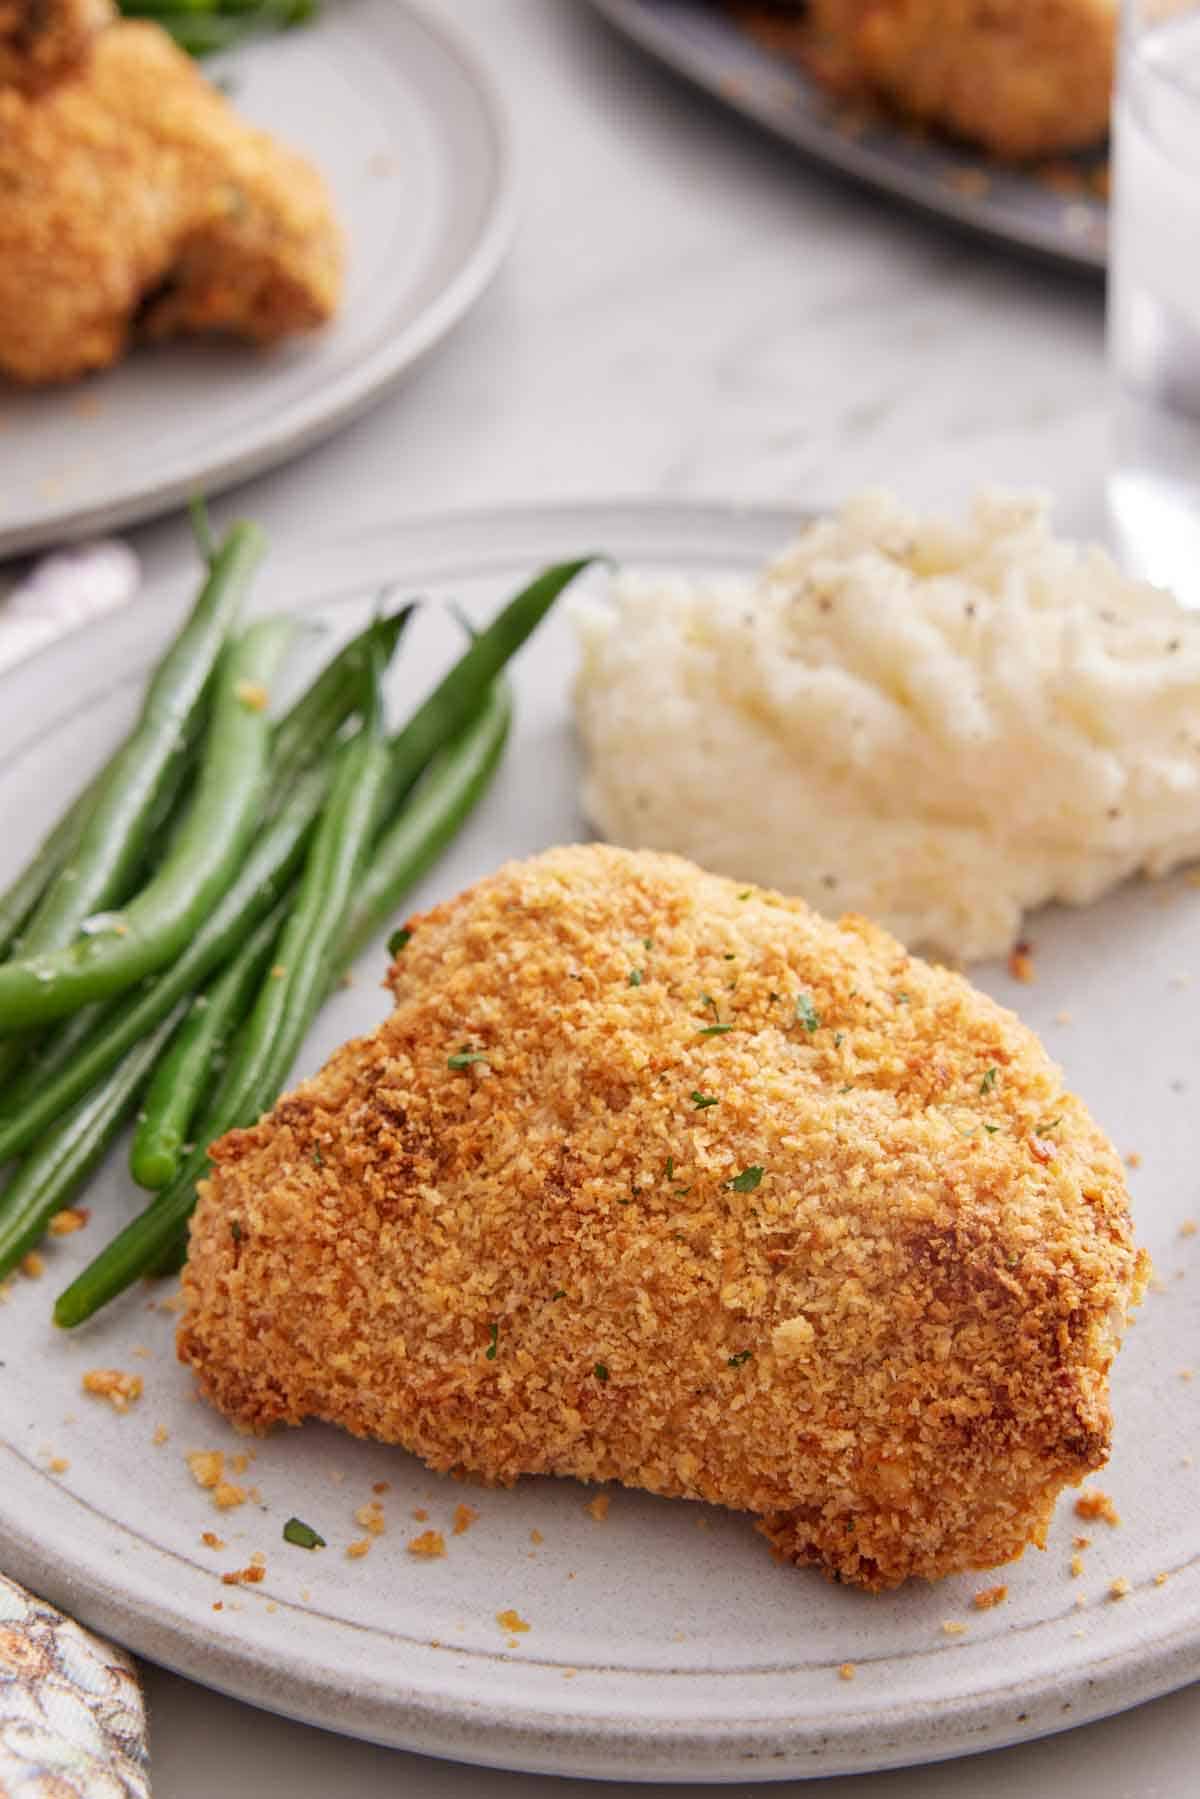 A oven fried chicken thigh on a plate with some green beans and mashed potatoes.